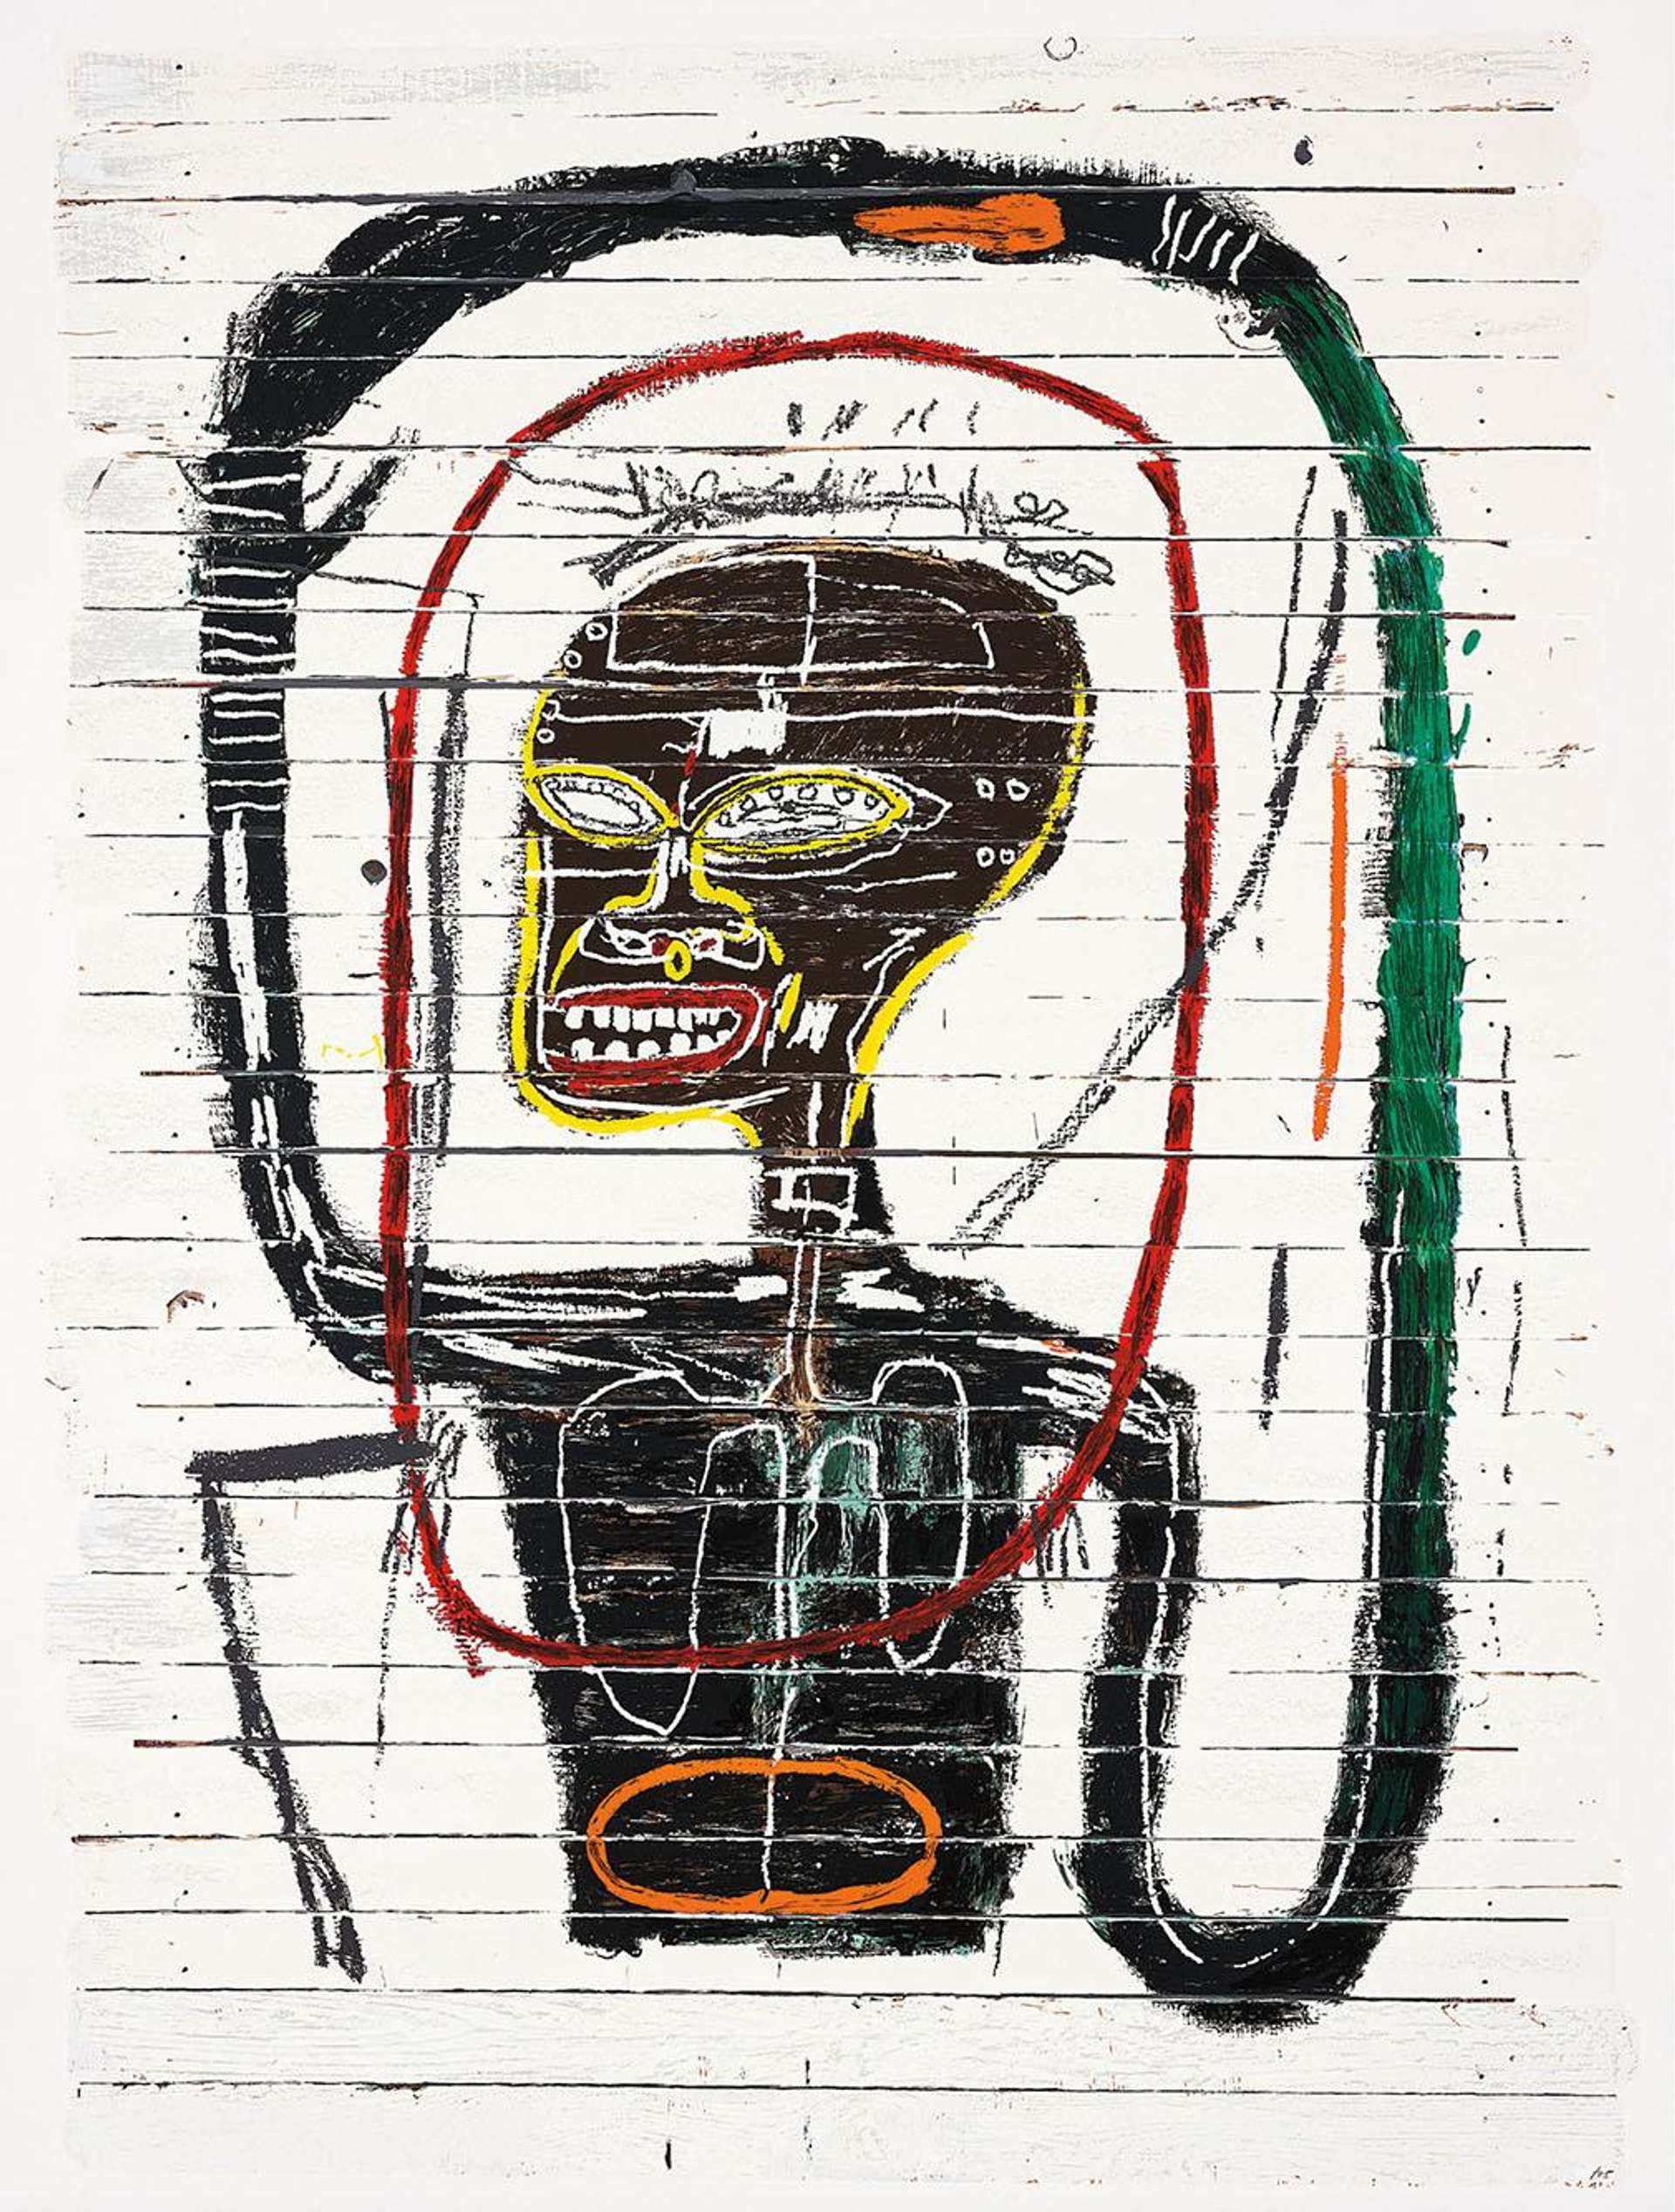 This print depicts a human figure with arms which appear to be joined up. The figure is a West African griot, a storyteller who would be responsible for passing on tribal histories and genealogies. The image is a primary example of the influence of West African culture on Basquiat’s oeuvre.